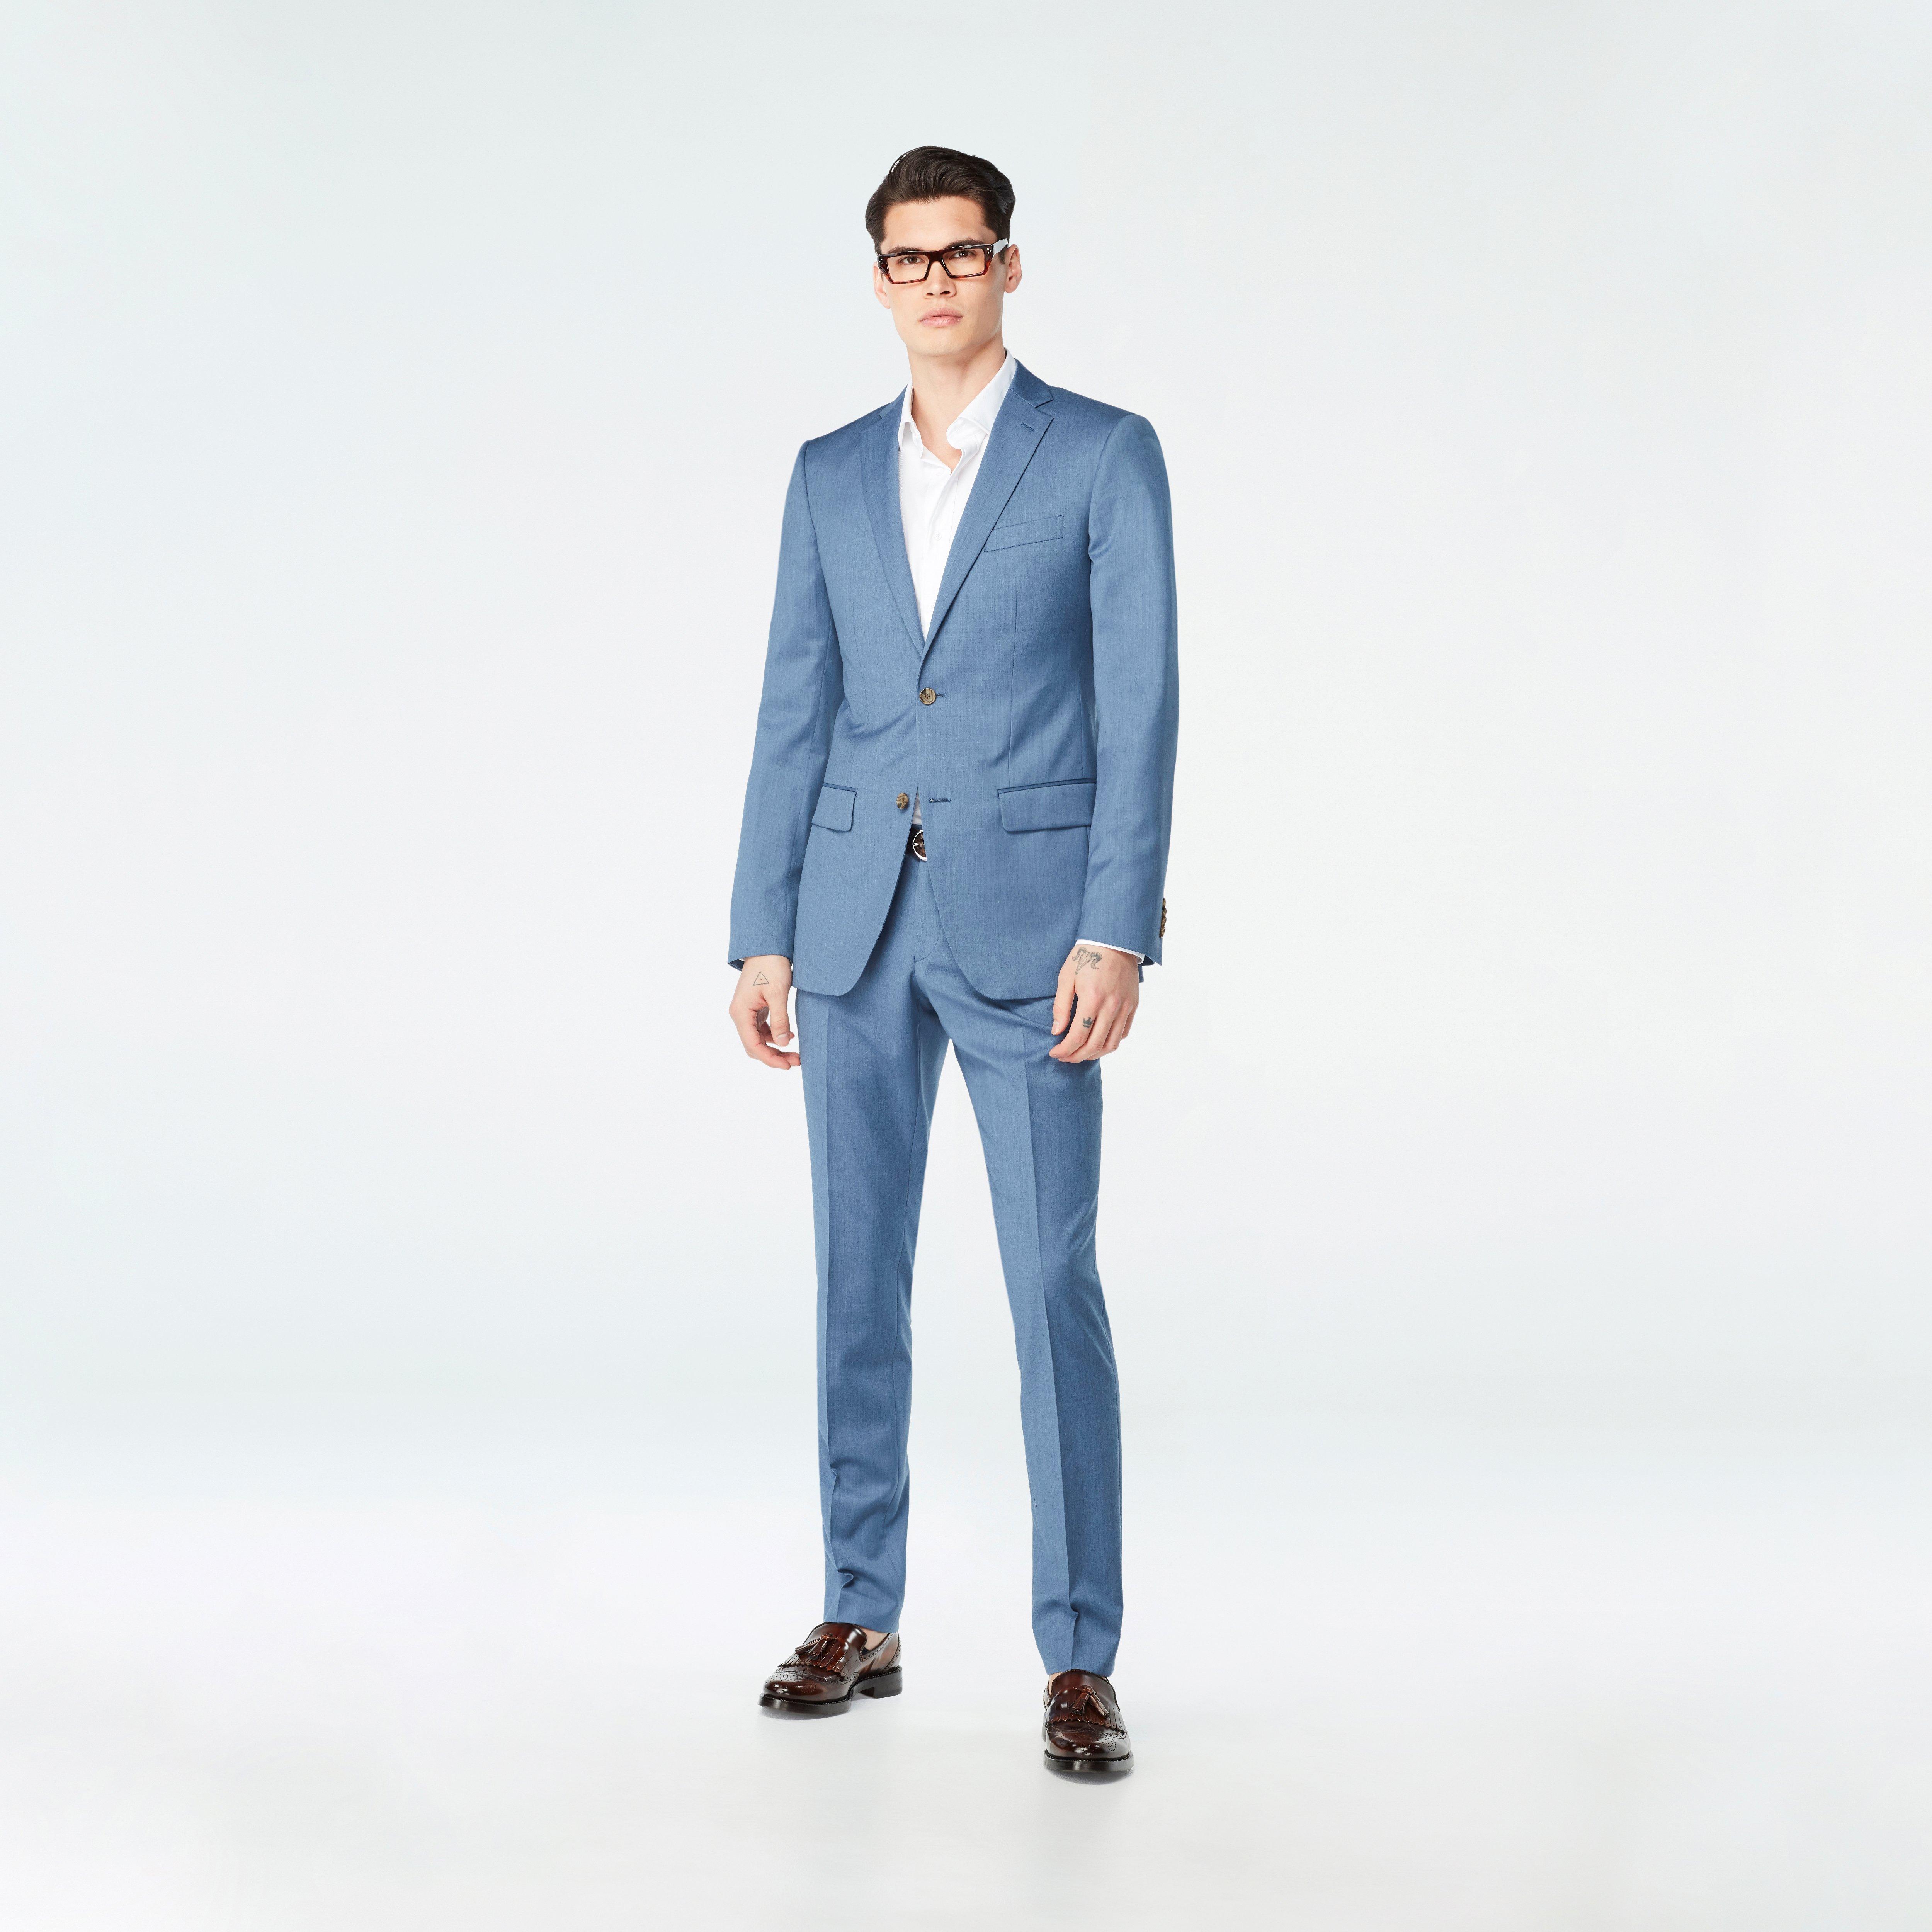 Custom Suits Made For You - Hemsworth Light Blue Suit | INDOCHINO